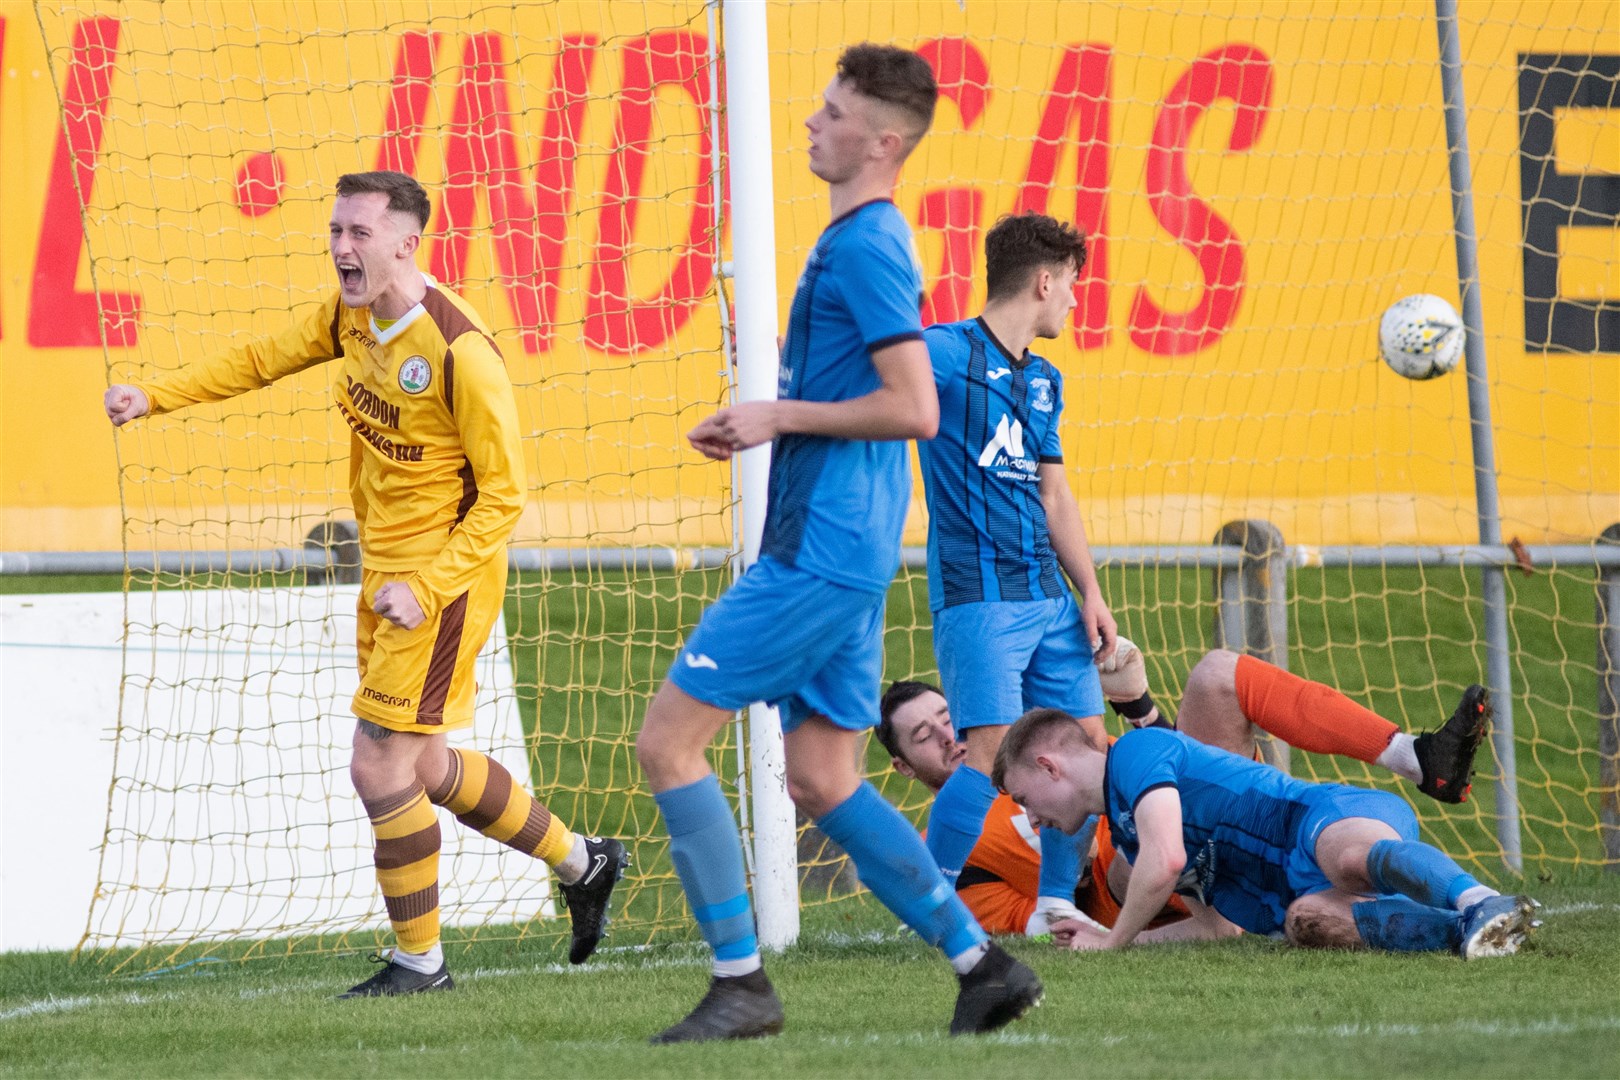 Forres Mechanics' Dale Wood wheels away to celebrate his first half goal against the Strathy Jags. ..Forres Mechanics FC (8) vs Strathspey Thistle FC (1) - Highland Football League 22/23 - Mosset Park, Forres 07/01/23...Picture: Daniel Forsyth..